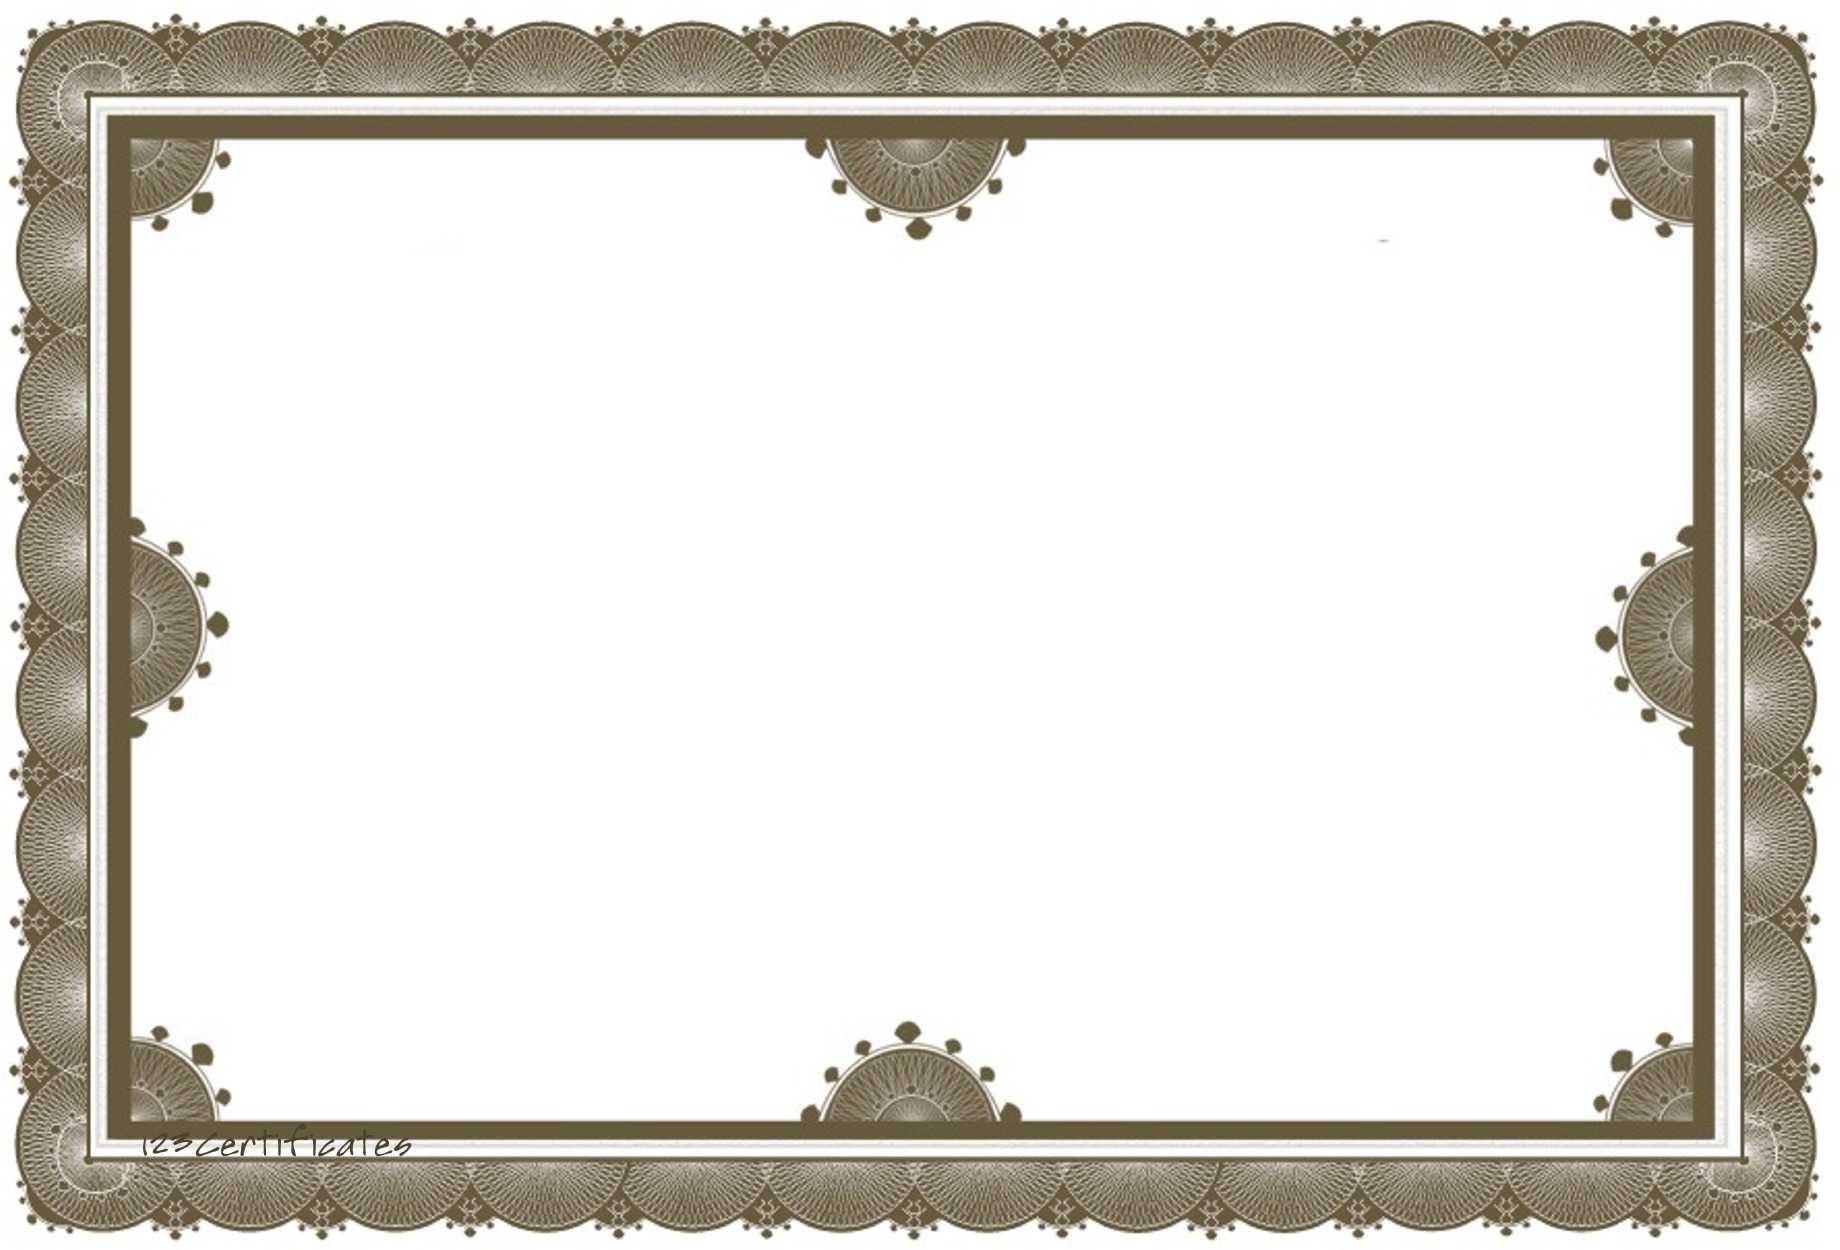 33 Notable Images Of Certificate Borders Within Award Certificate Border Template